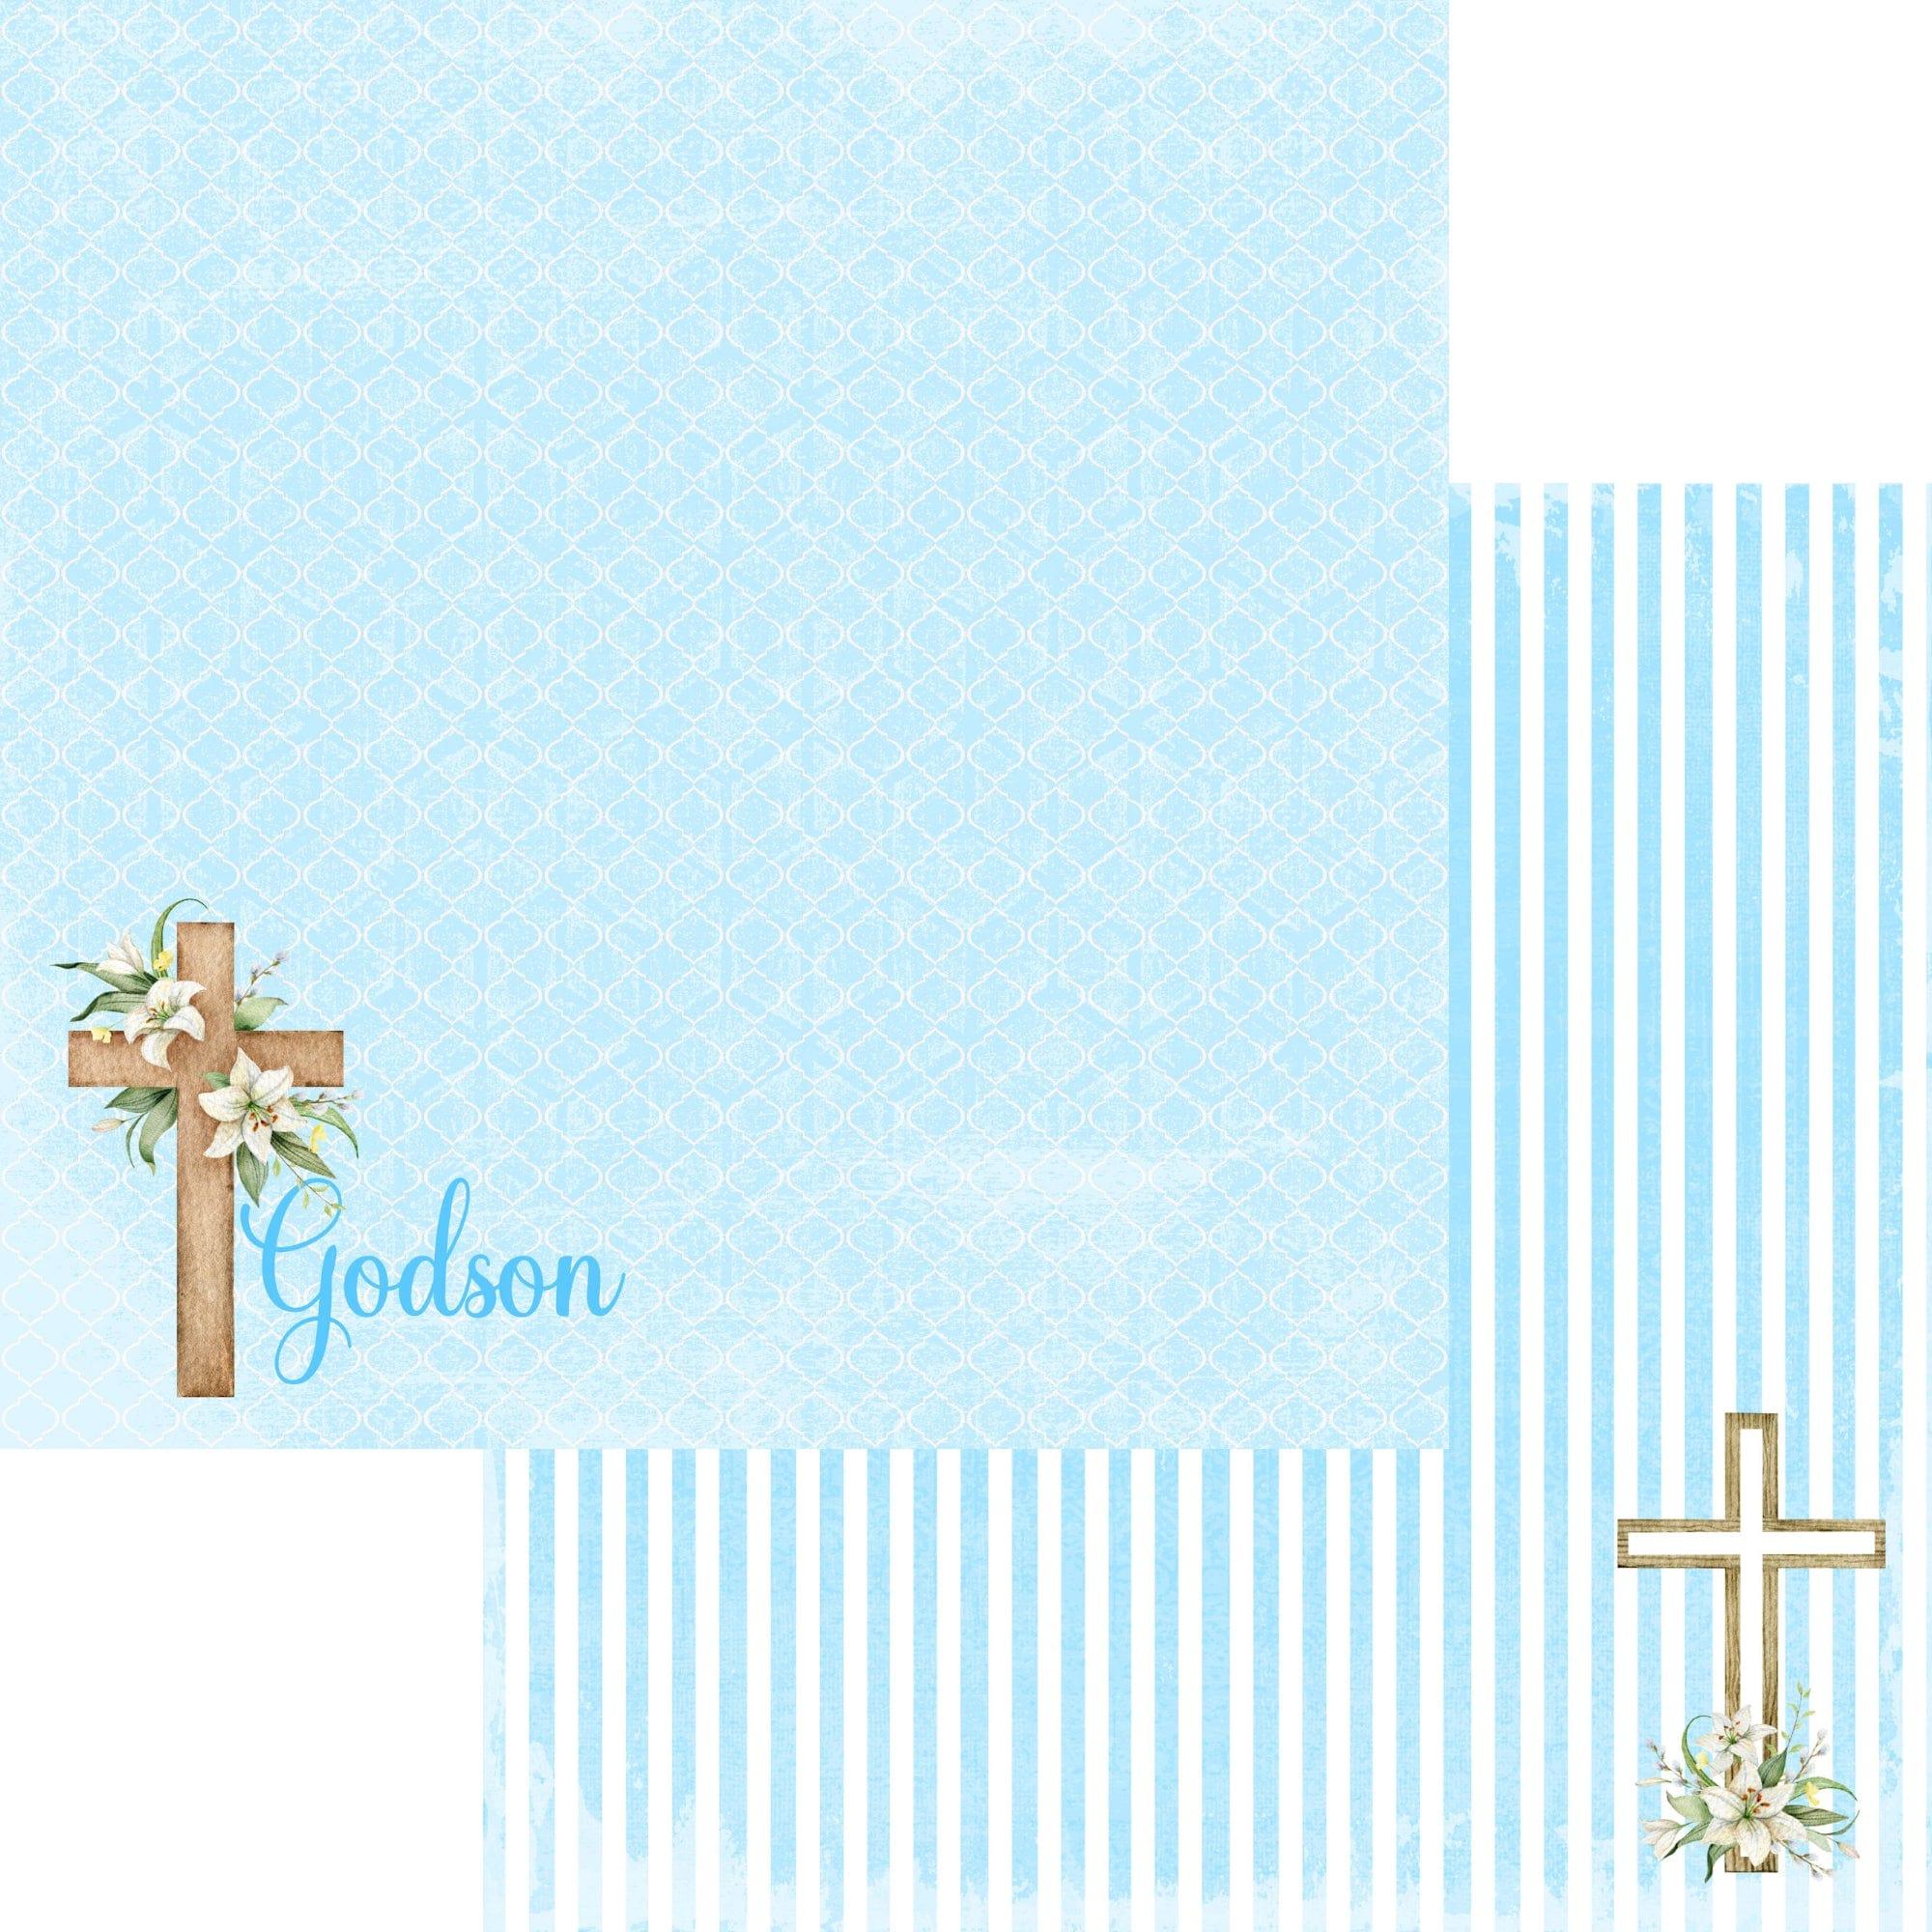 Holy Sacraments Collection Godson 12 x 12 Double-Sided Scrapbook Paper by SSC Designs